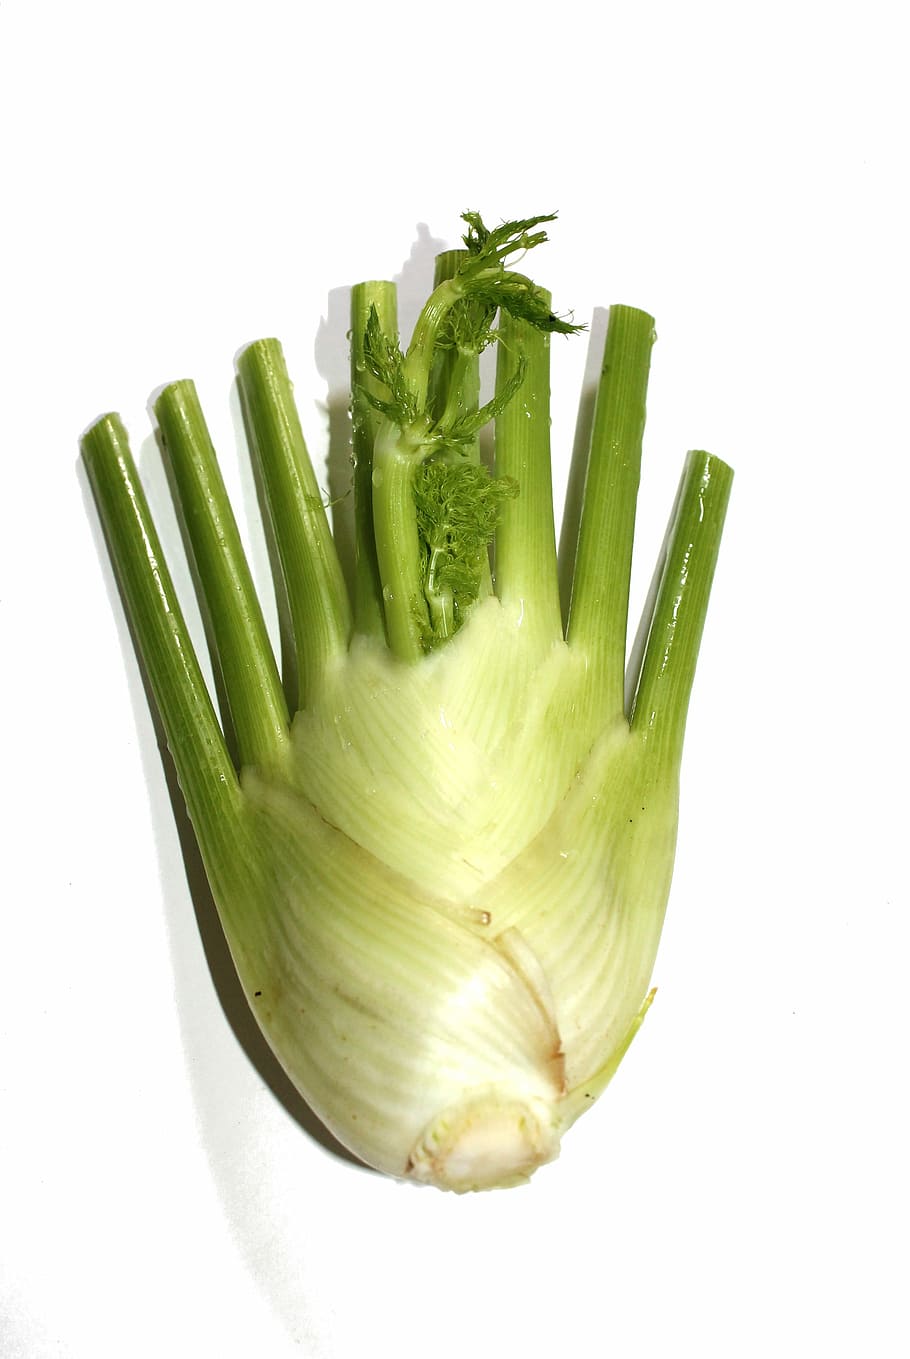 Fennel, Vegetable, Herbs, Healthy, Plant, food, raw, green color, white background, freshness